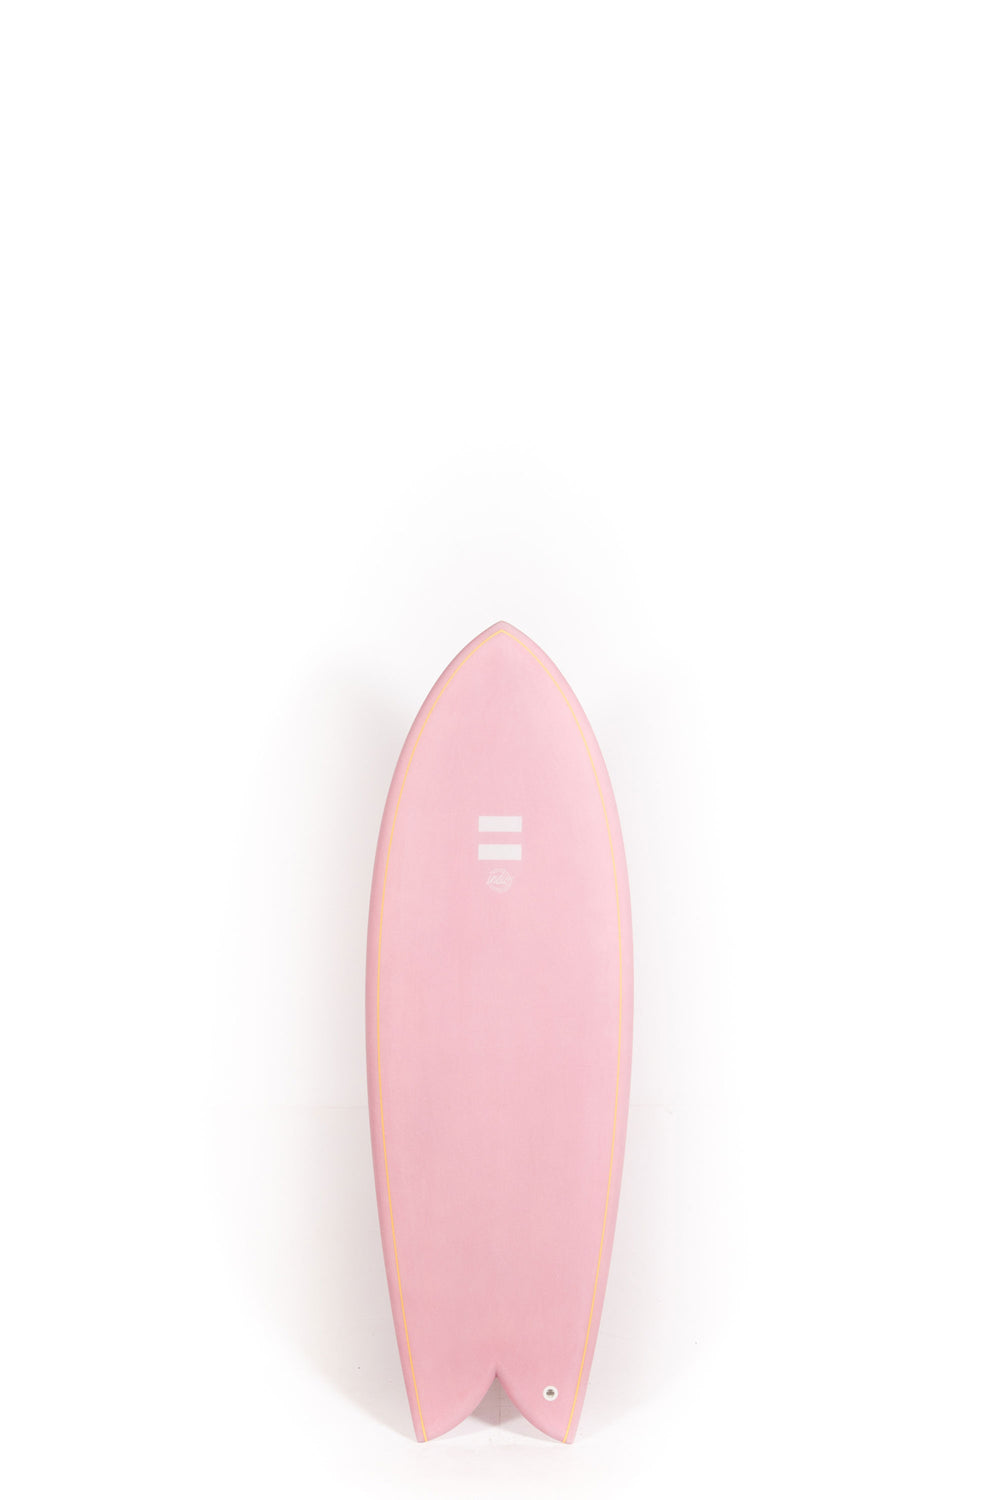 Pukas-Surf-Shop-Indio-Surfboards-Dab-pink-5_3